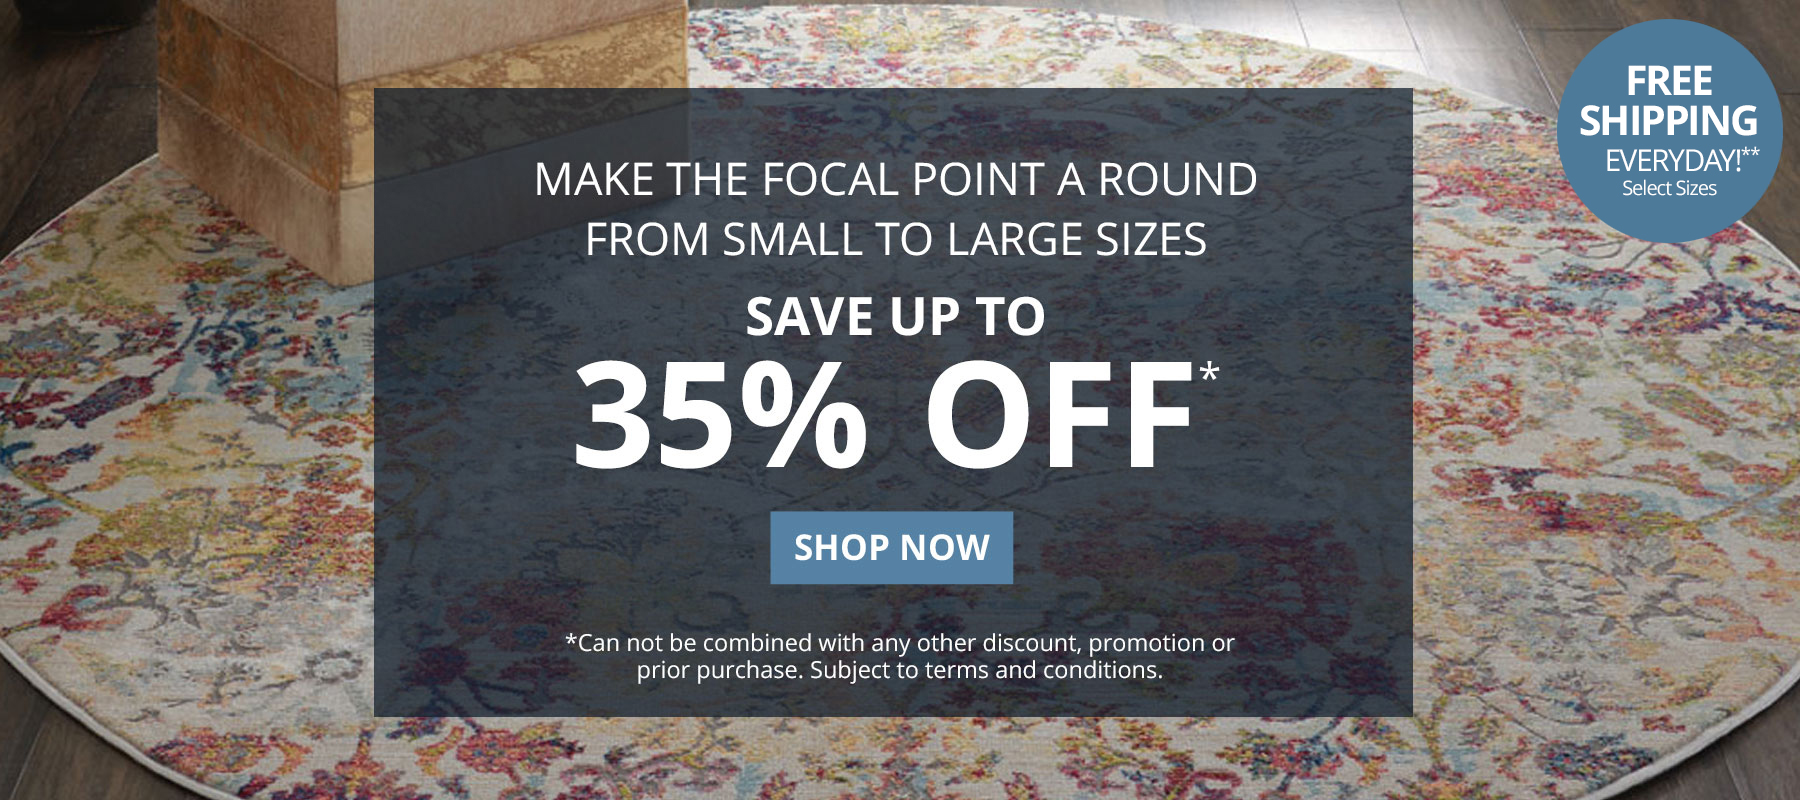 Make the focal point a round rug. From small to large sizes. Save up to 35% Off* *Can not be combined with any other discount, promotion or prior purchase. Subject to terms and conditions. Shop Now.